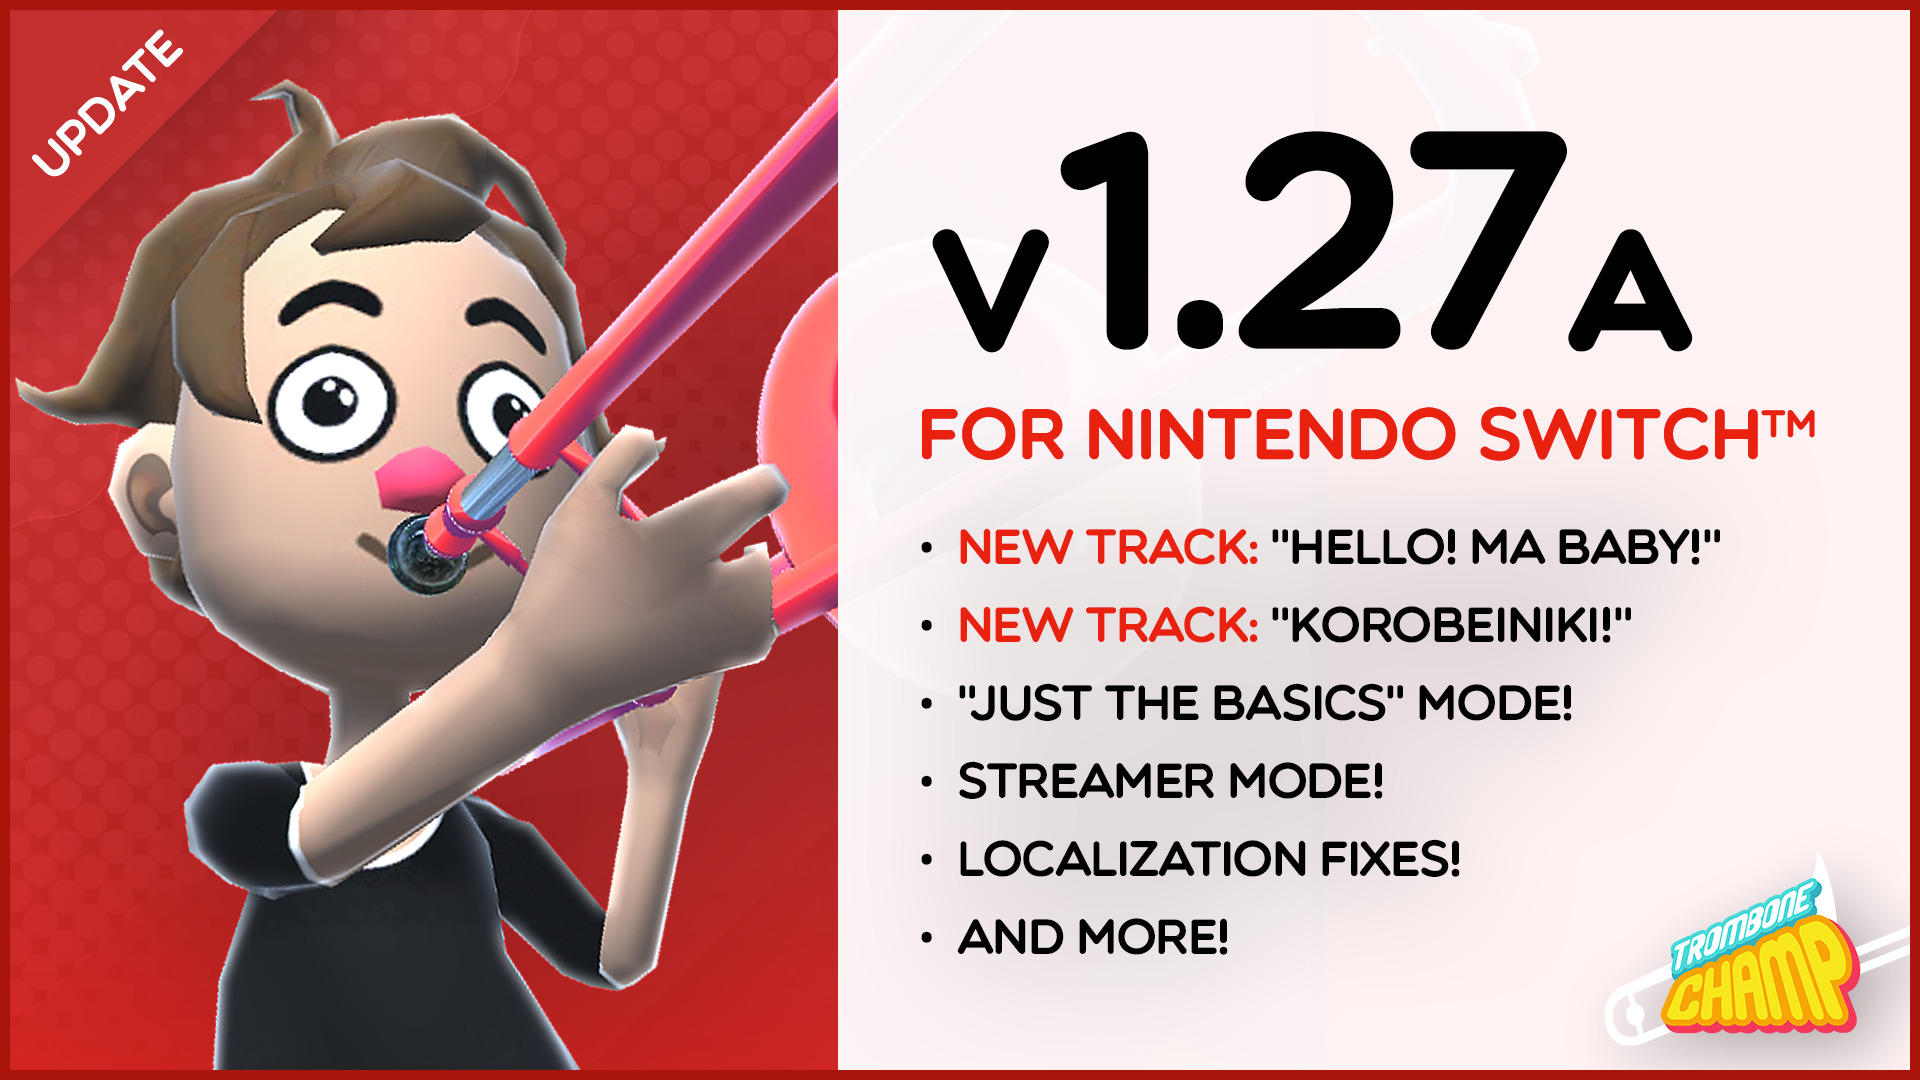 Trombone Champ Version 1.27A comes to the Nintendo Switch™!